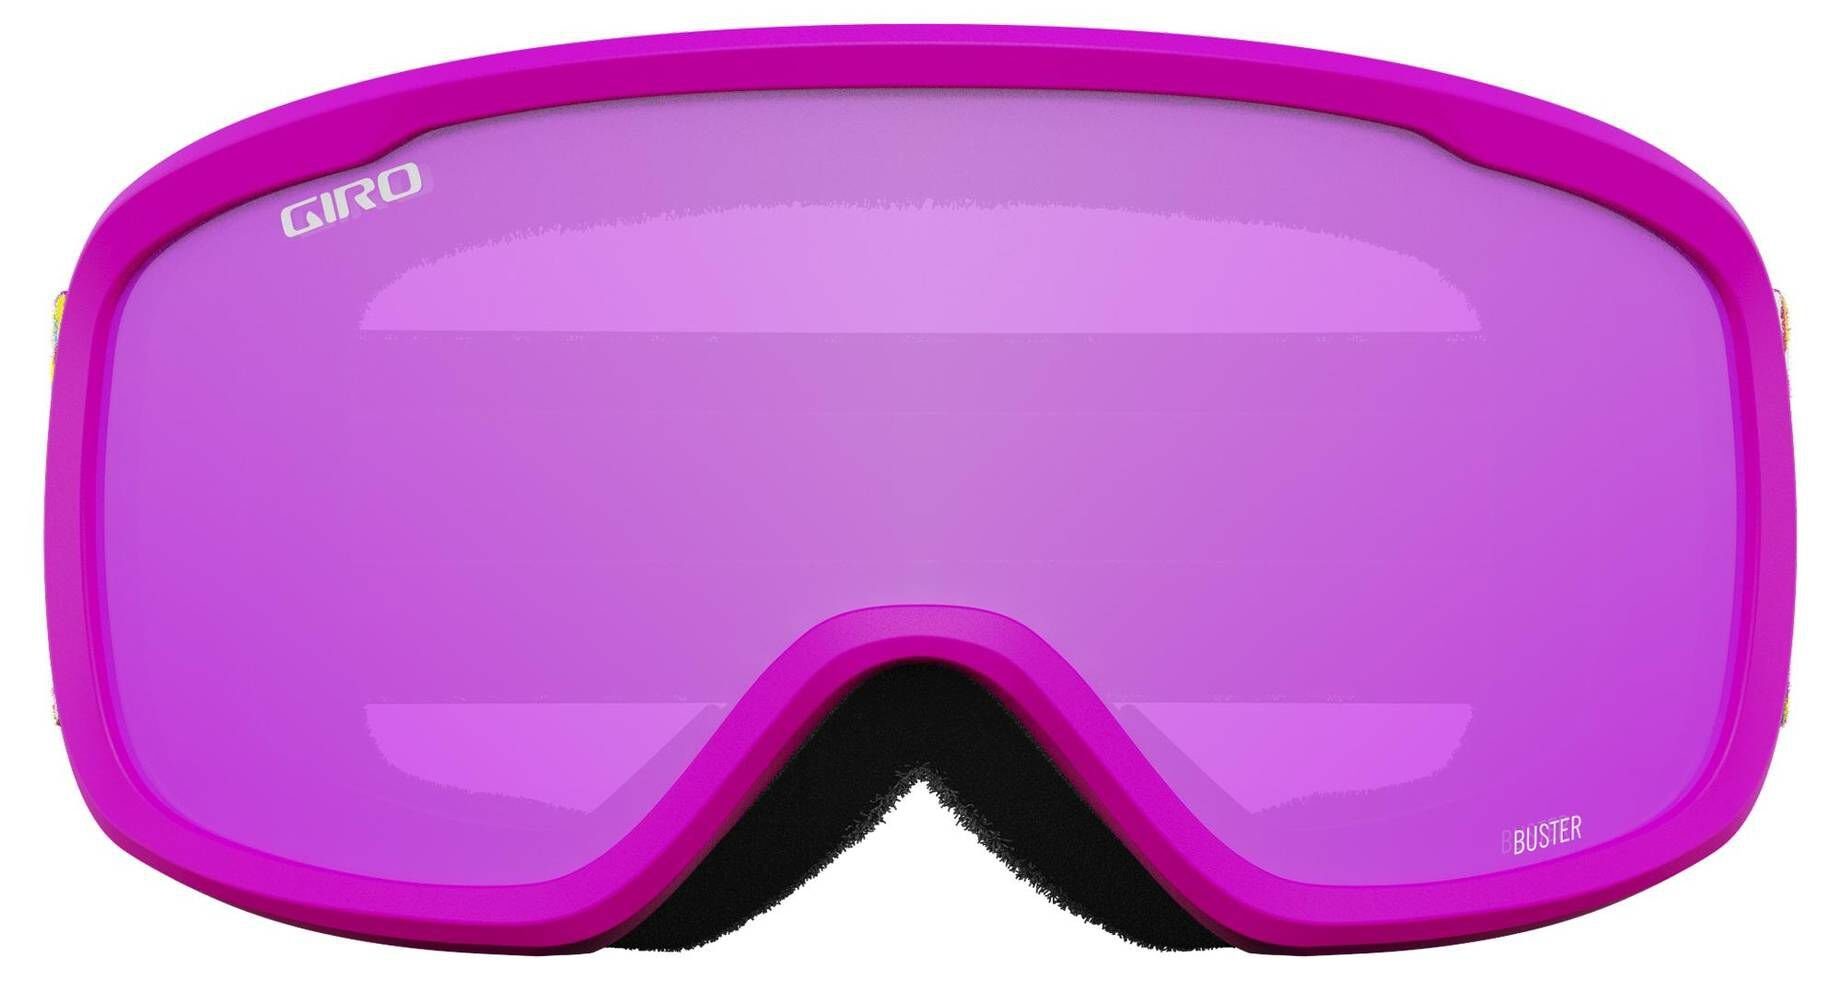 Giro Skibrille Kinder Skibrille SNOW GOGGLE BUSTER wollweiss (101)